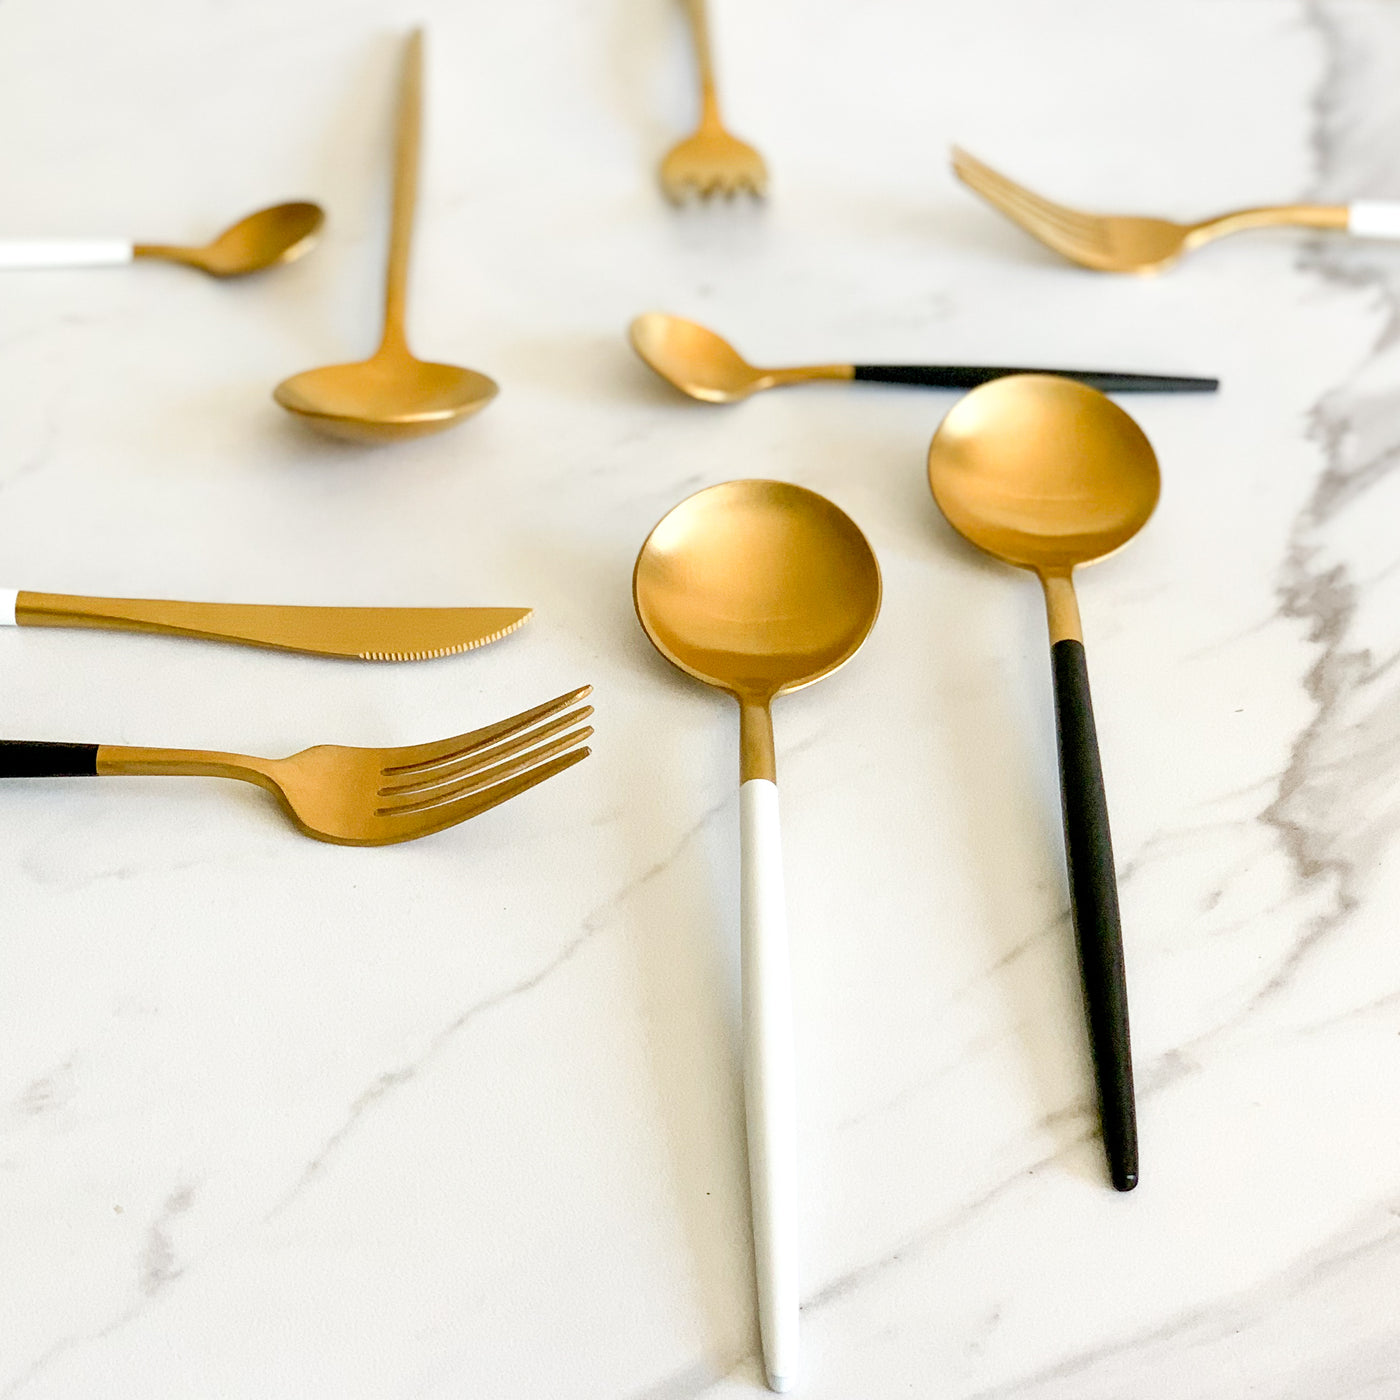 TUSK CUTLERY SET | WHITE AND GOLD | 16 PIECE